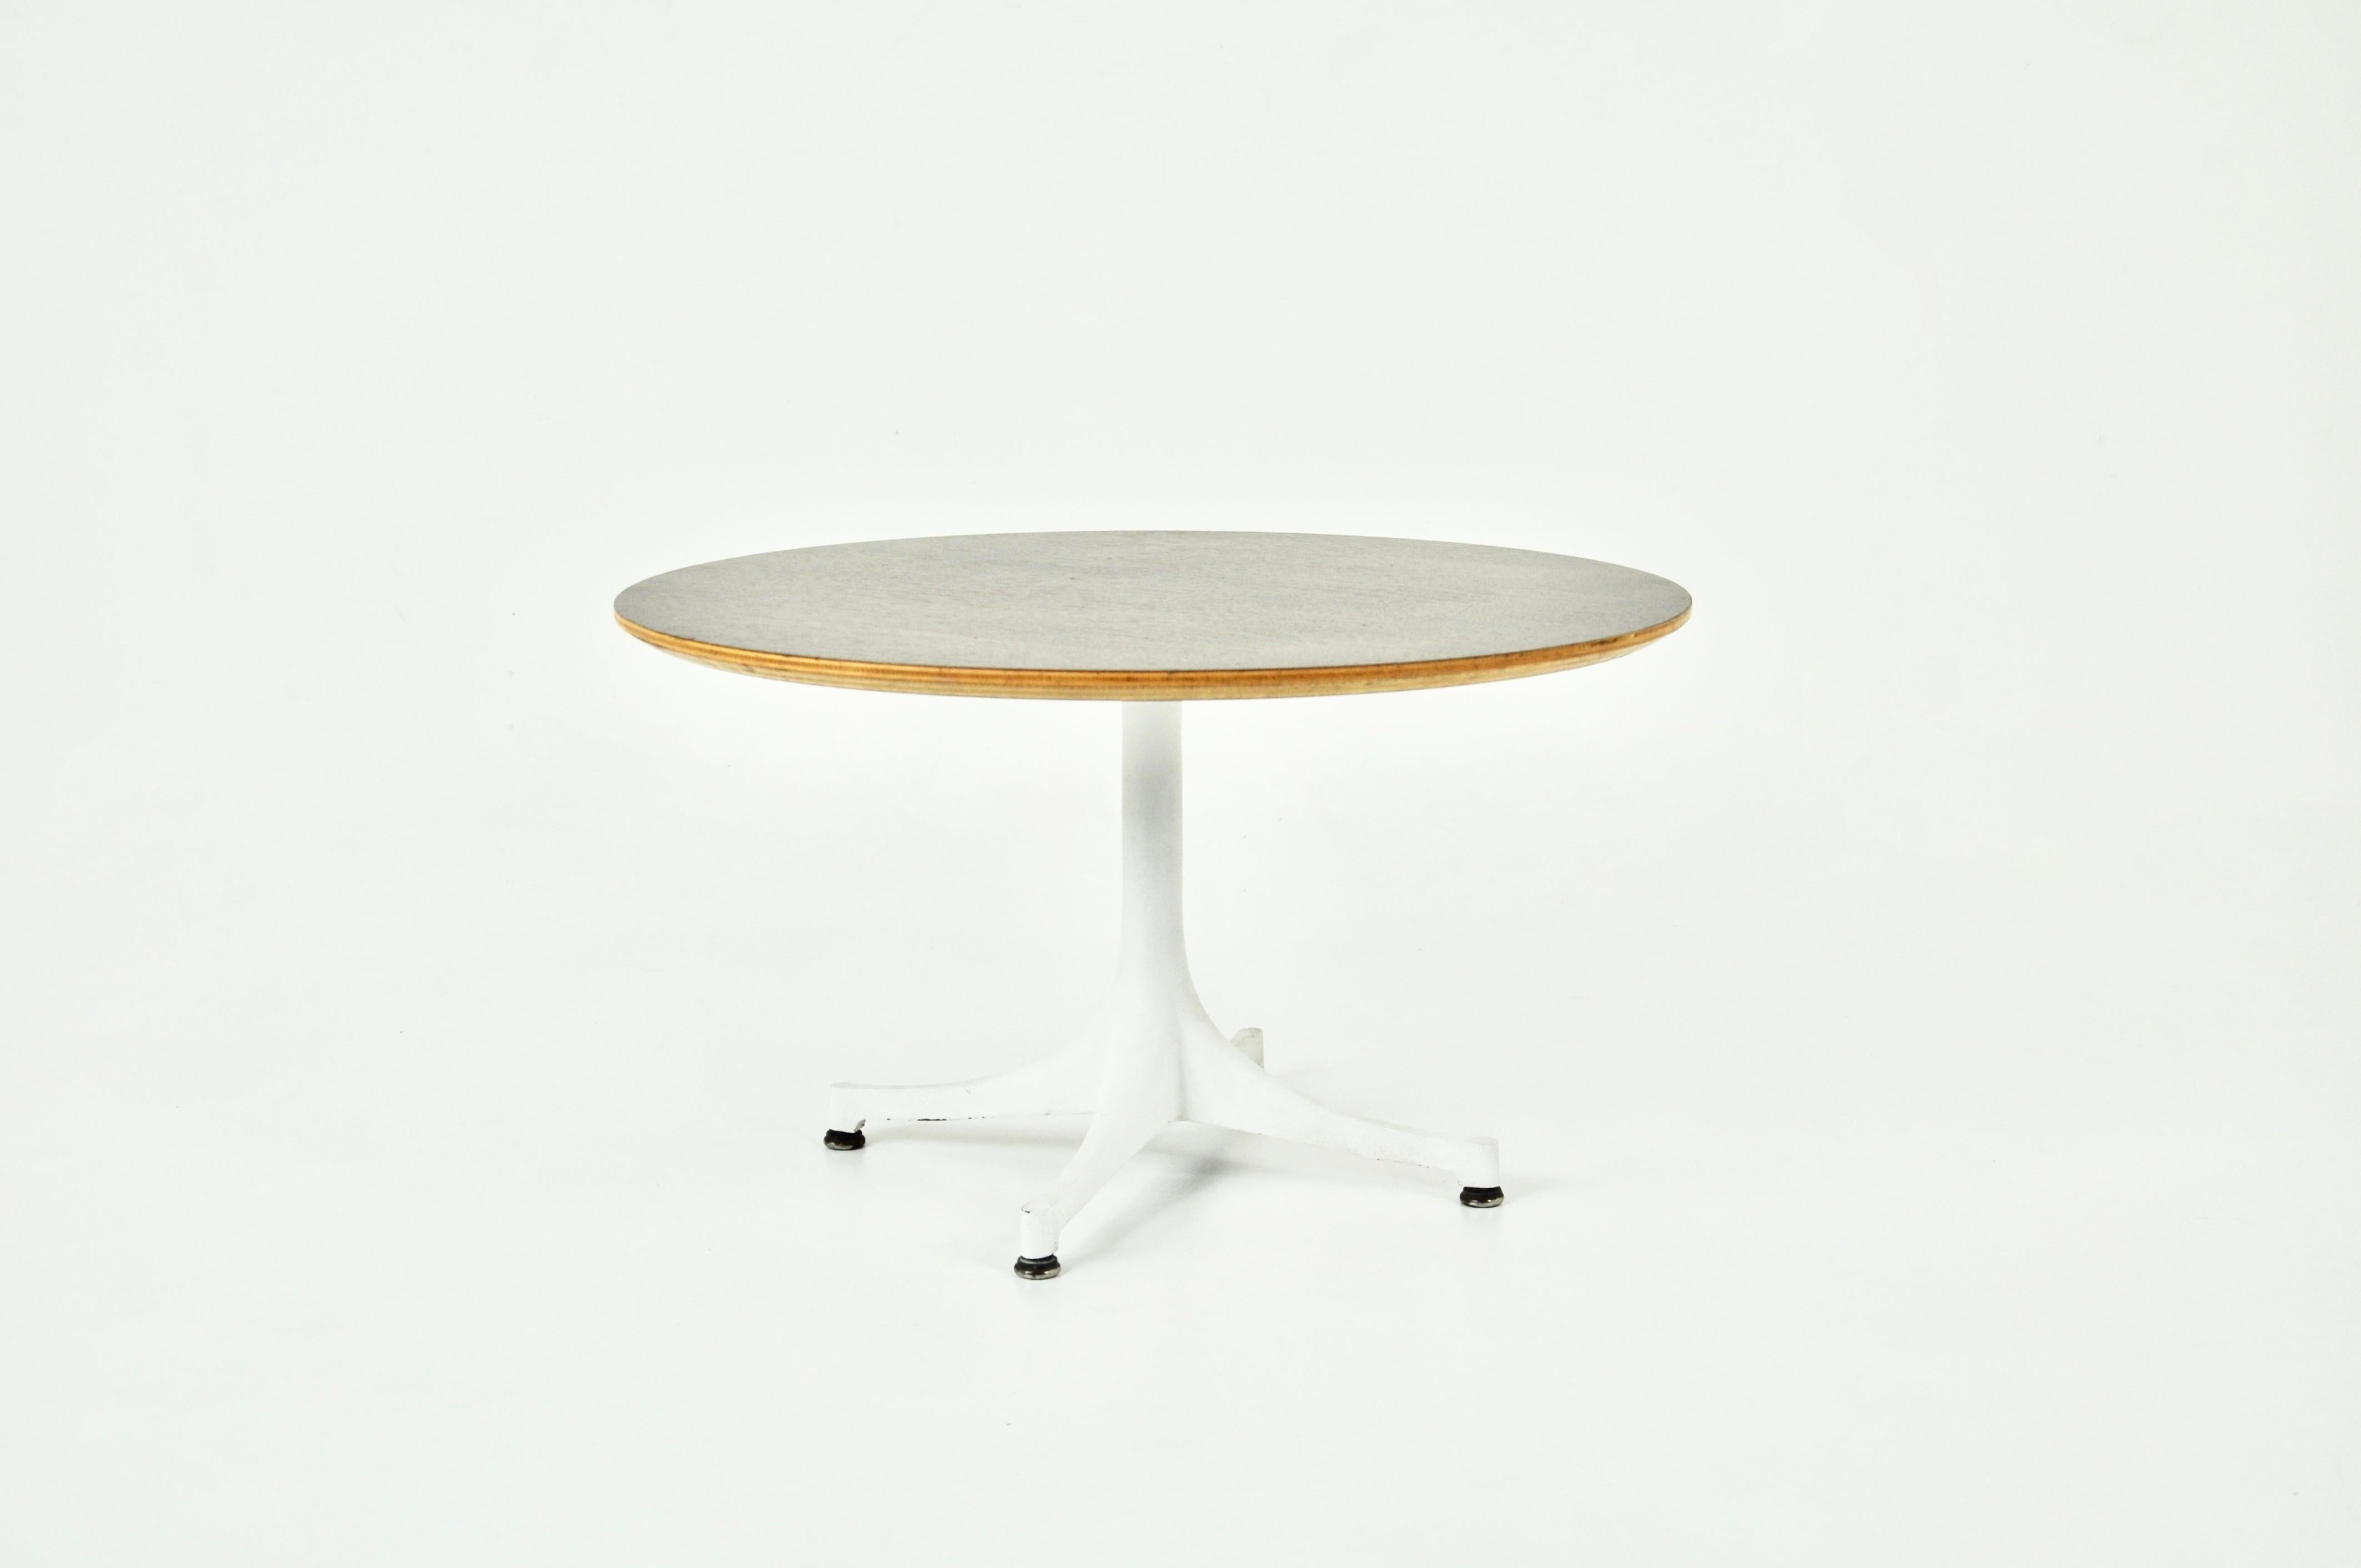 Table with  wooden top and metal base designed by George Nelson and produced by Herman Miller in the 1960s. Wear due to time and age of the table